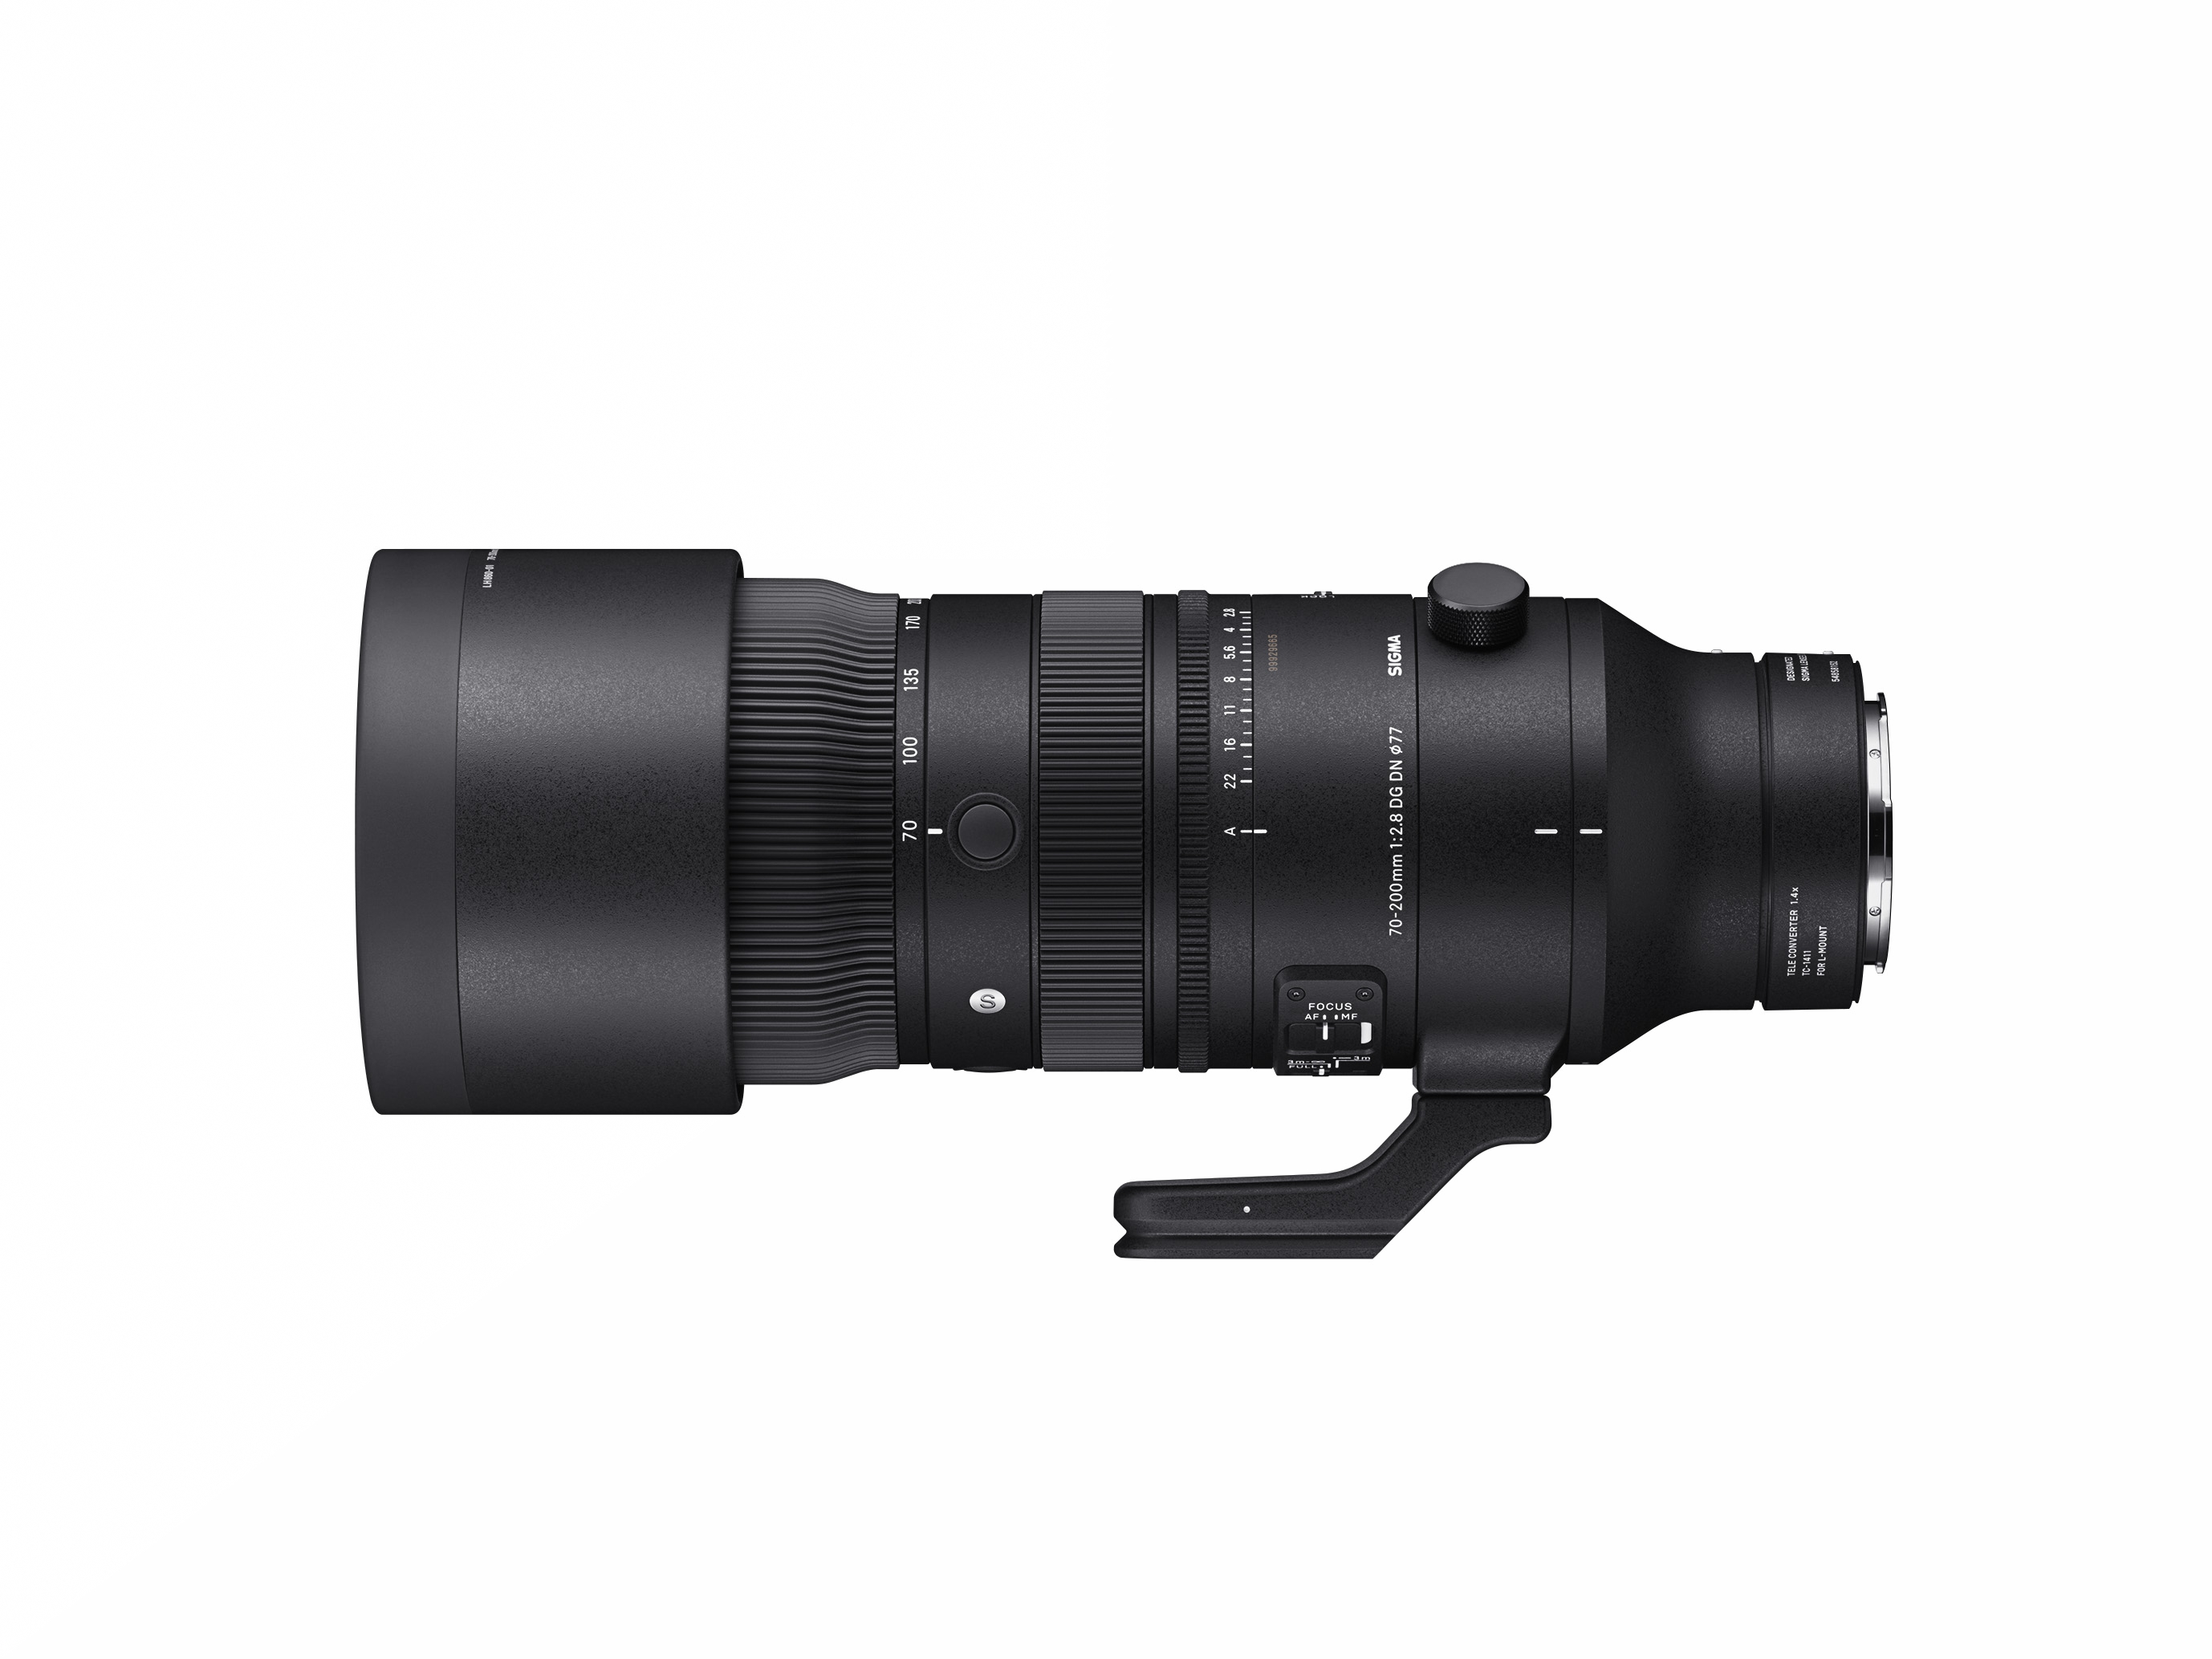 The SIGMA 70-200mm F2.8 DG DN OS | Sports lens has been officially announced. Completely redesigned for full-frame mirrorless camera systems, the new lens combines exceptional optical performance, and a lightweight, dust-and splash-proof design for the most demanding sitiuations. The lens will retail for $1,499 and will be available beginning December 7, 2023. SIGMA AMERICA PRESS RELEASE ART